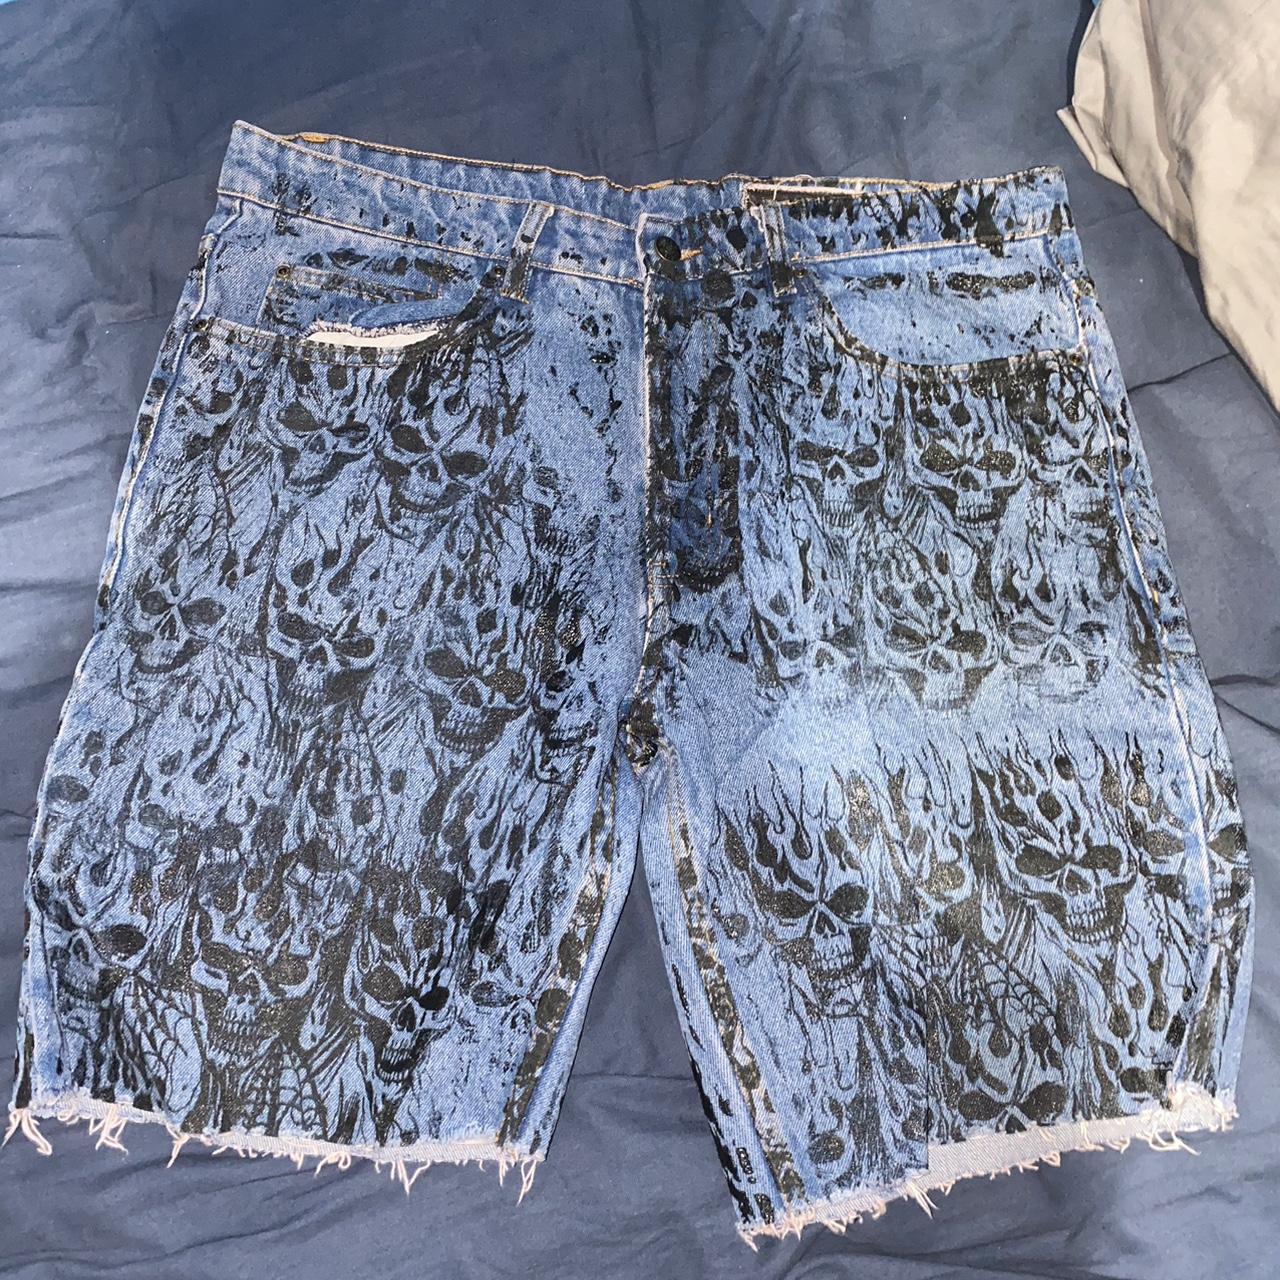 personal joint jorts tagged 34 but huge, maybe... - Depop